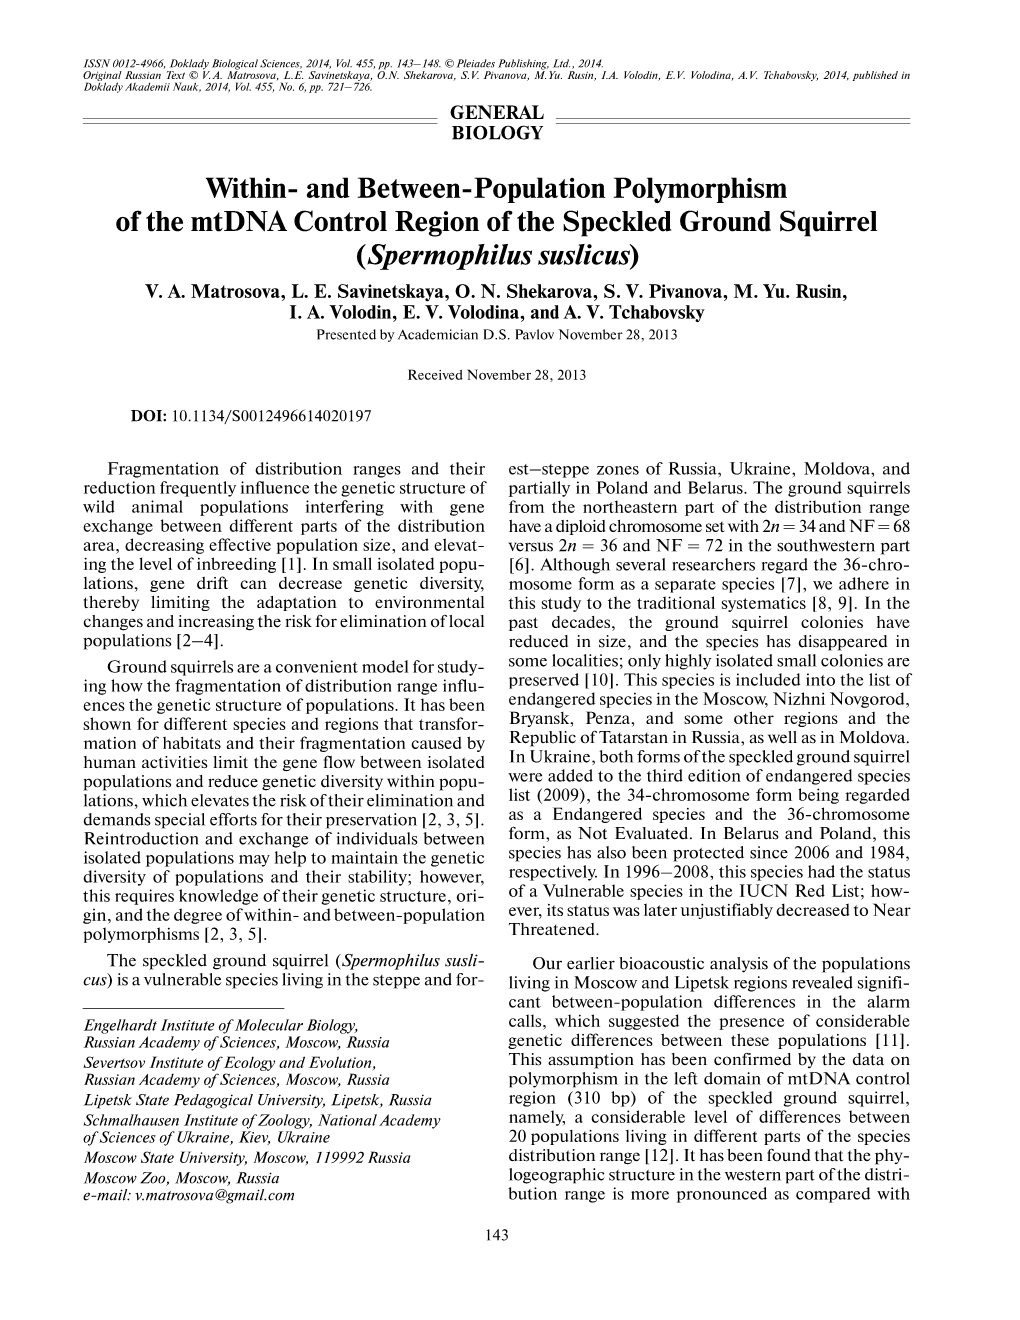 Within and Between Population Polymorphism of the Mtdna Control Region of the Speckled Ground Squirrel (Spermophilus Suslicus)